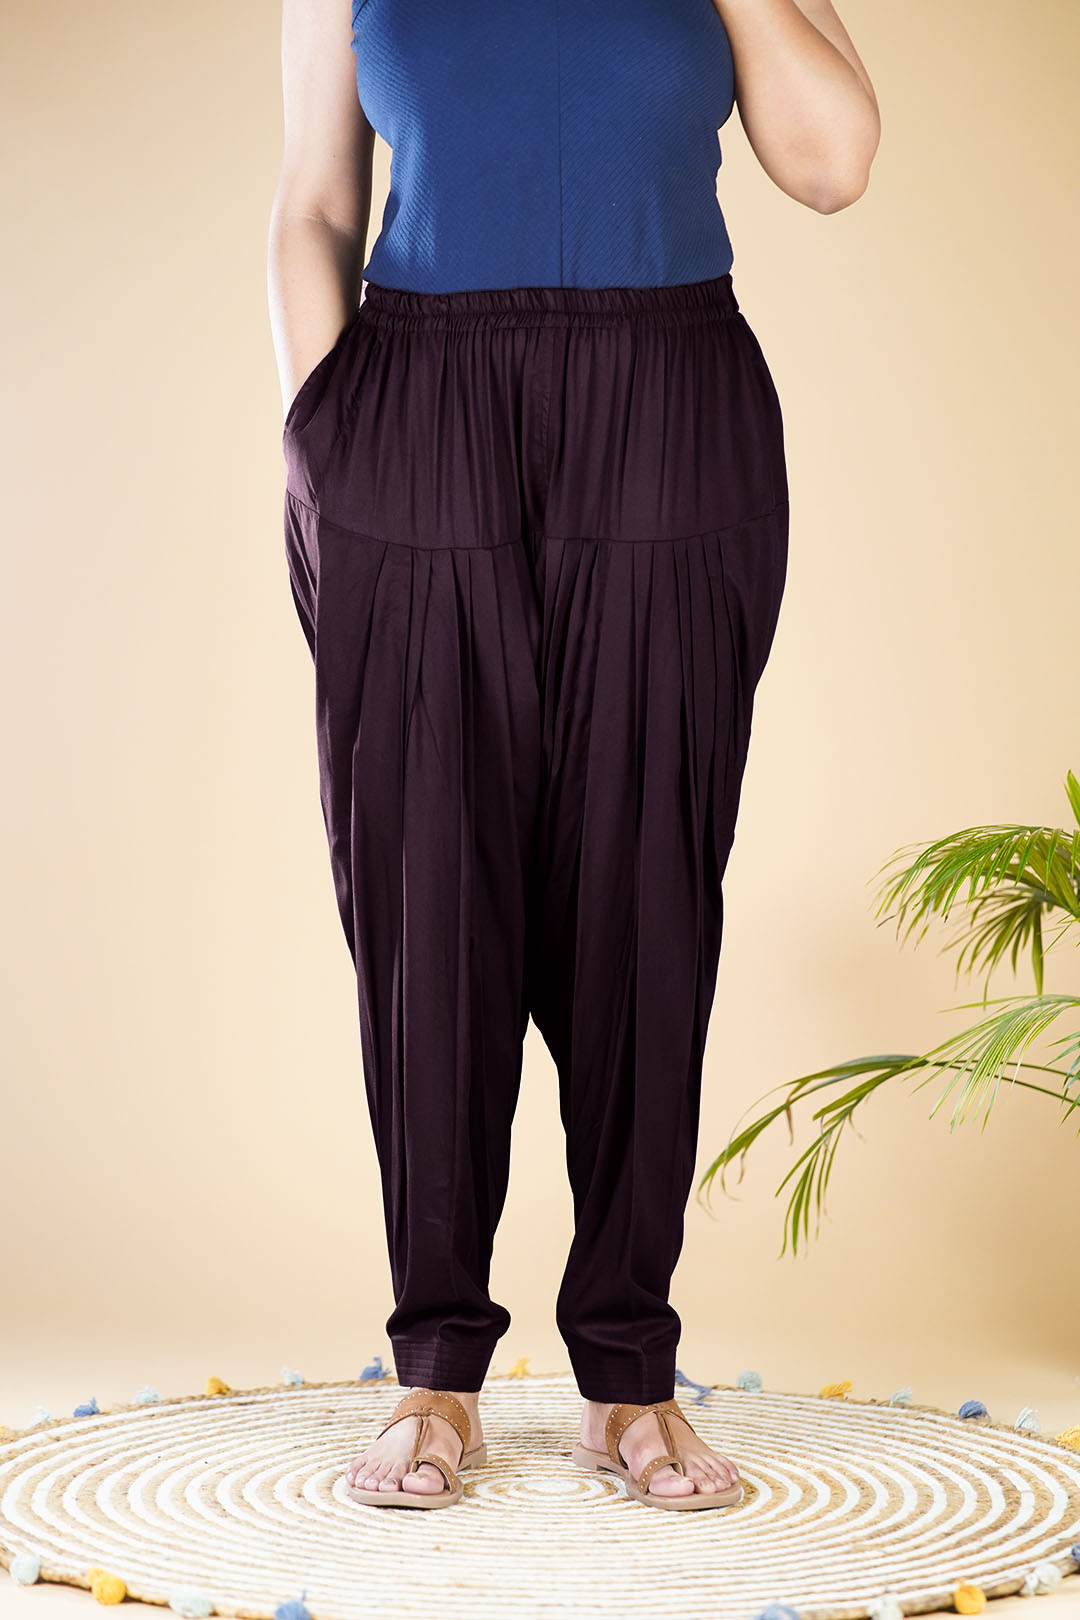 Indore Harem Trousers